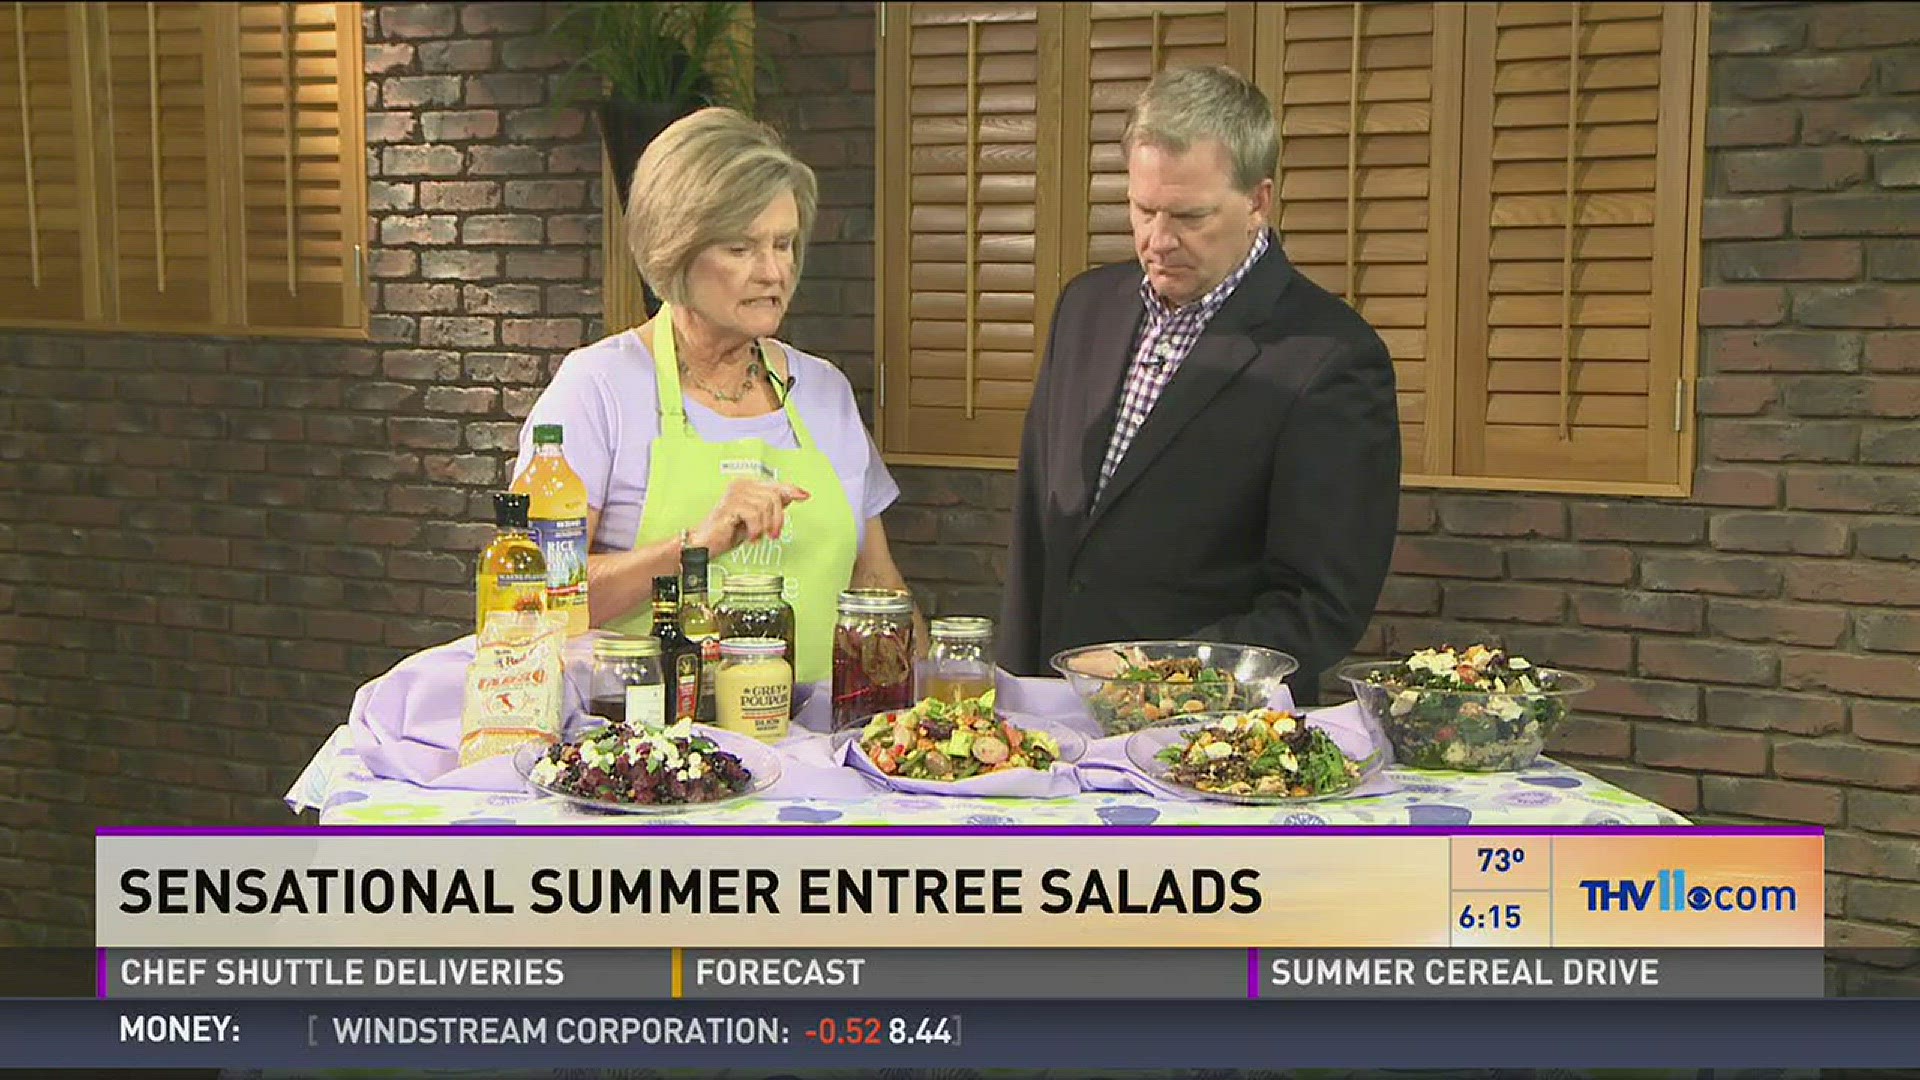 Debbie Arnold visited THV This Morning with many summer salad ideas